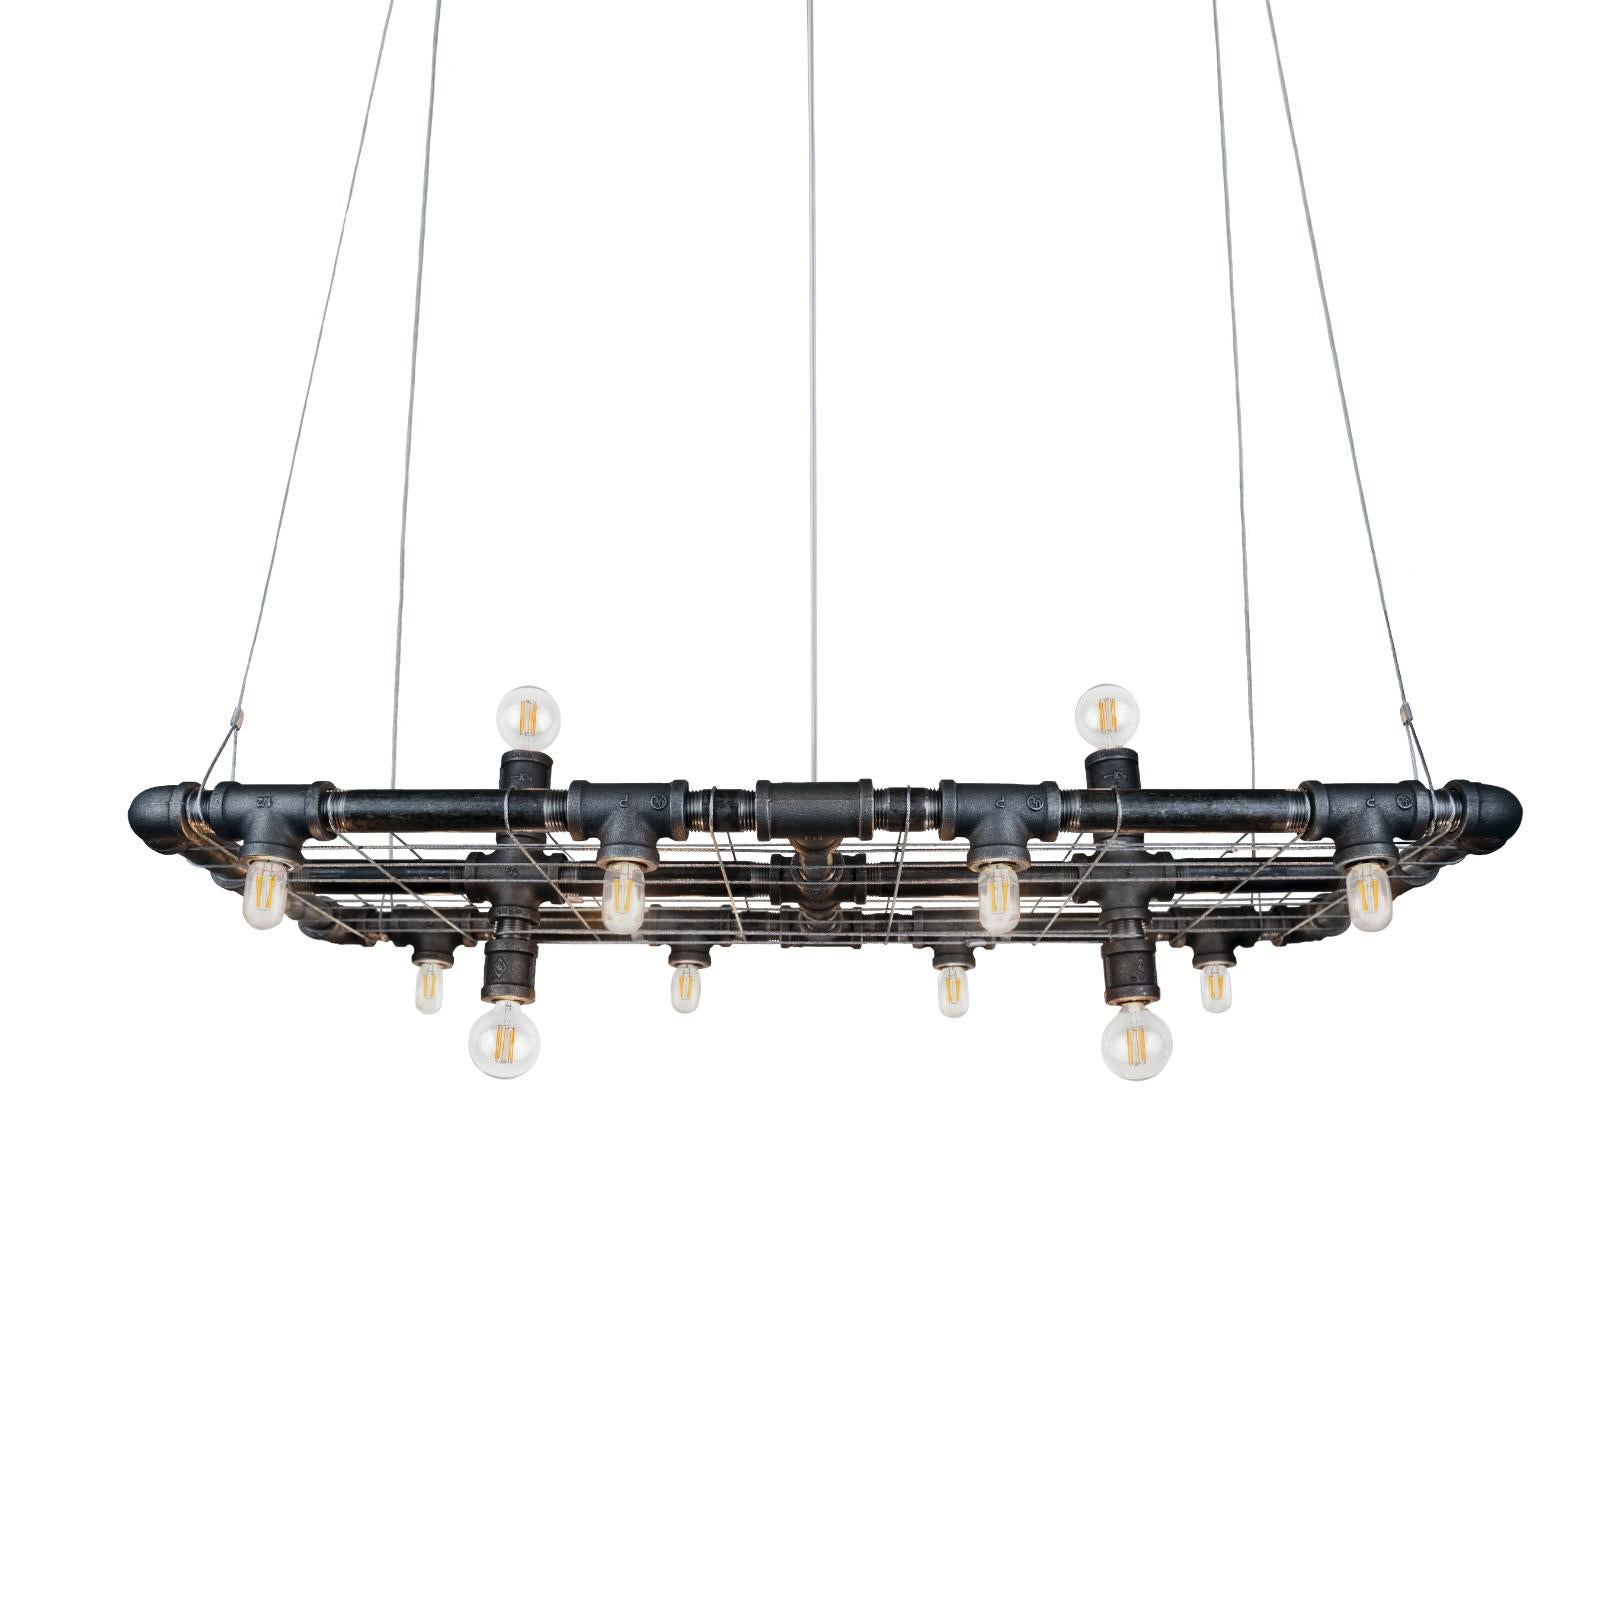 Raw mini-banqueting linear suspension by Michael McHale
Dimensions: D 28 x W 74 x H 25.5 cm.
Materials: steel, optically-pure gem-cut crystal.

20 x candelabra base CA7 bulb, either incandescent or LED

All our lamps can be wired according to